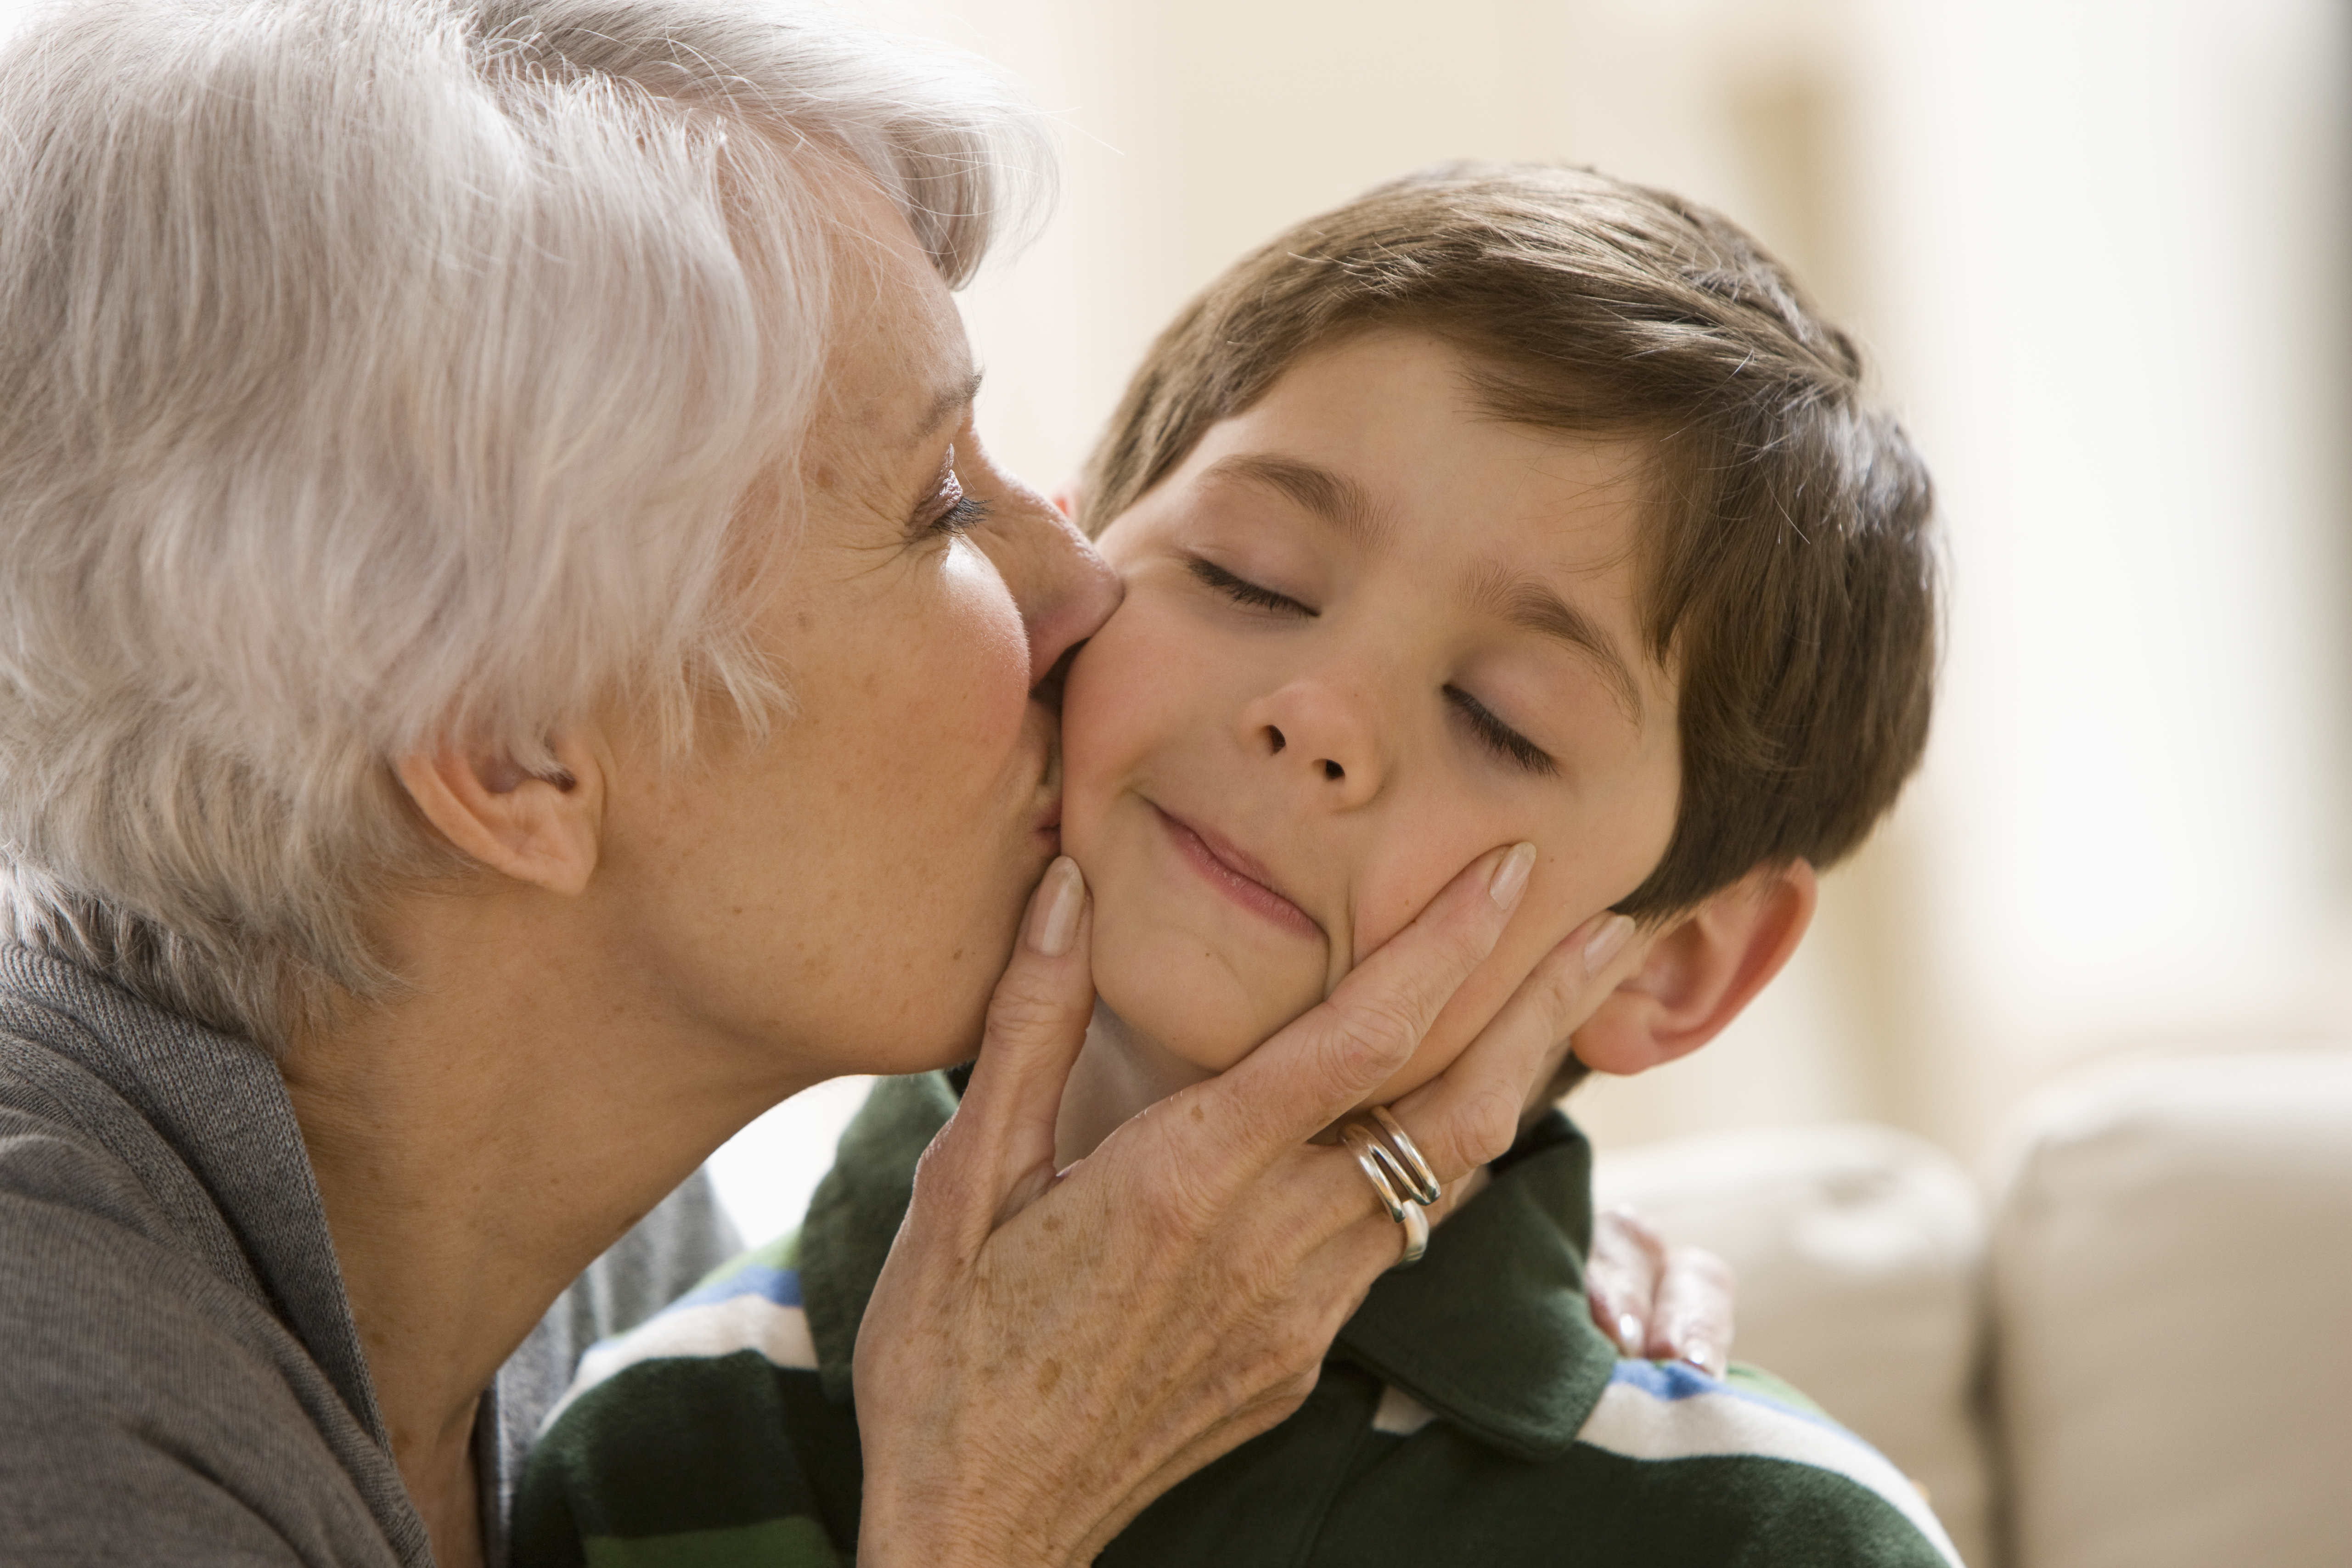 A grandmother kissing her grandson on the cheek | Source: Getty Images